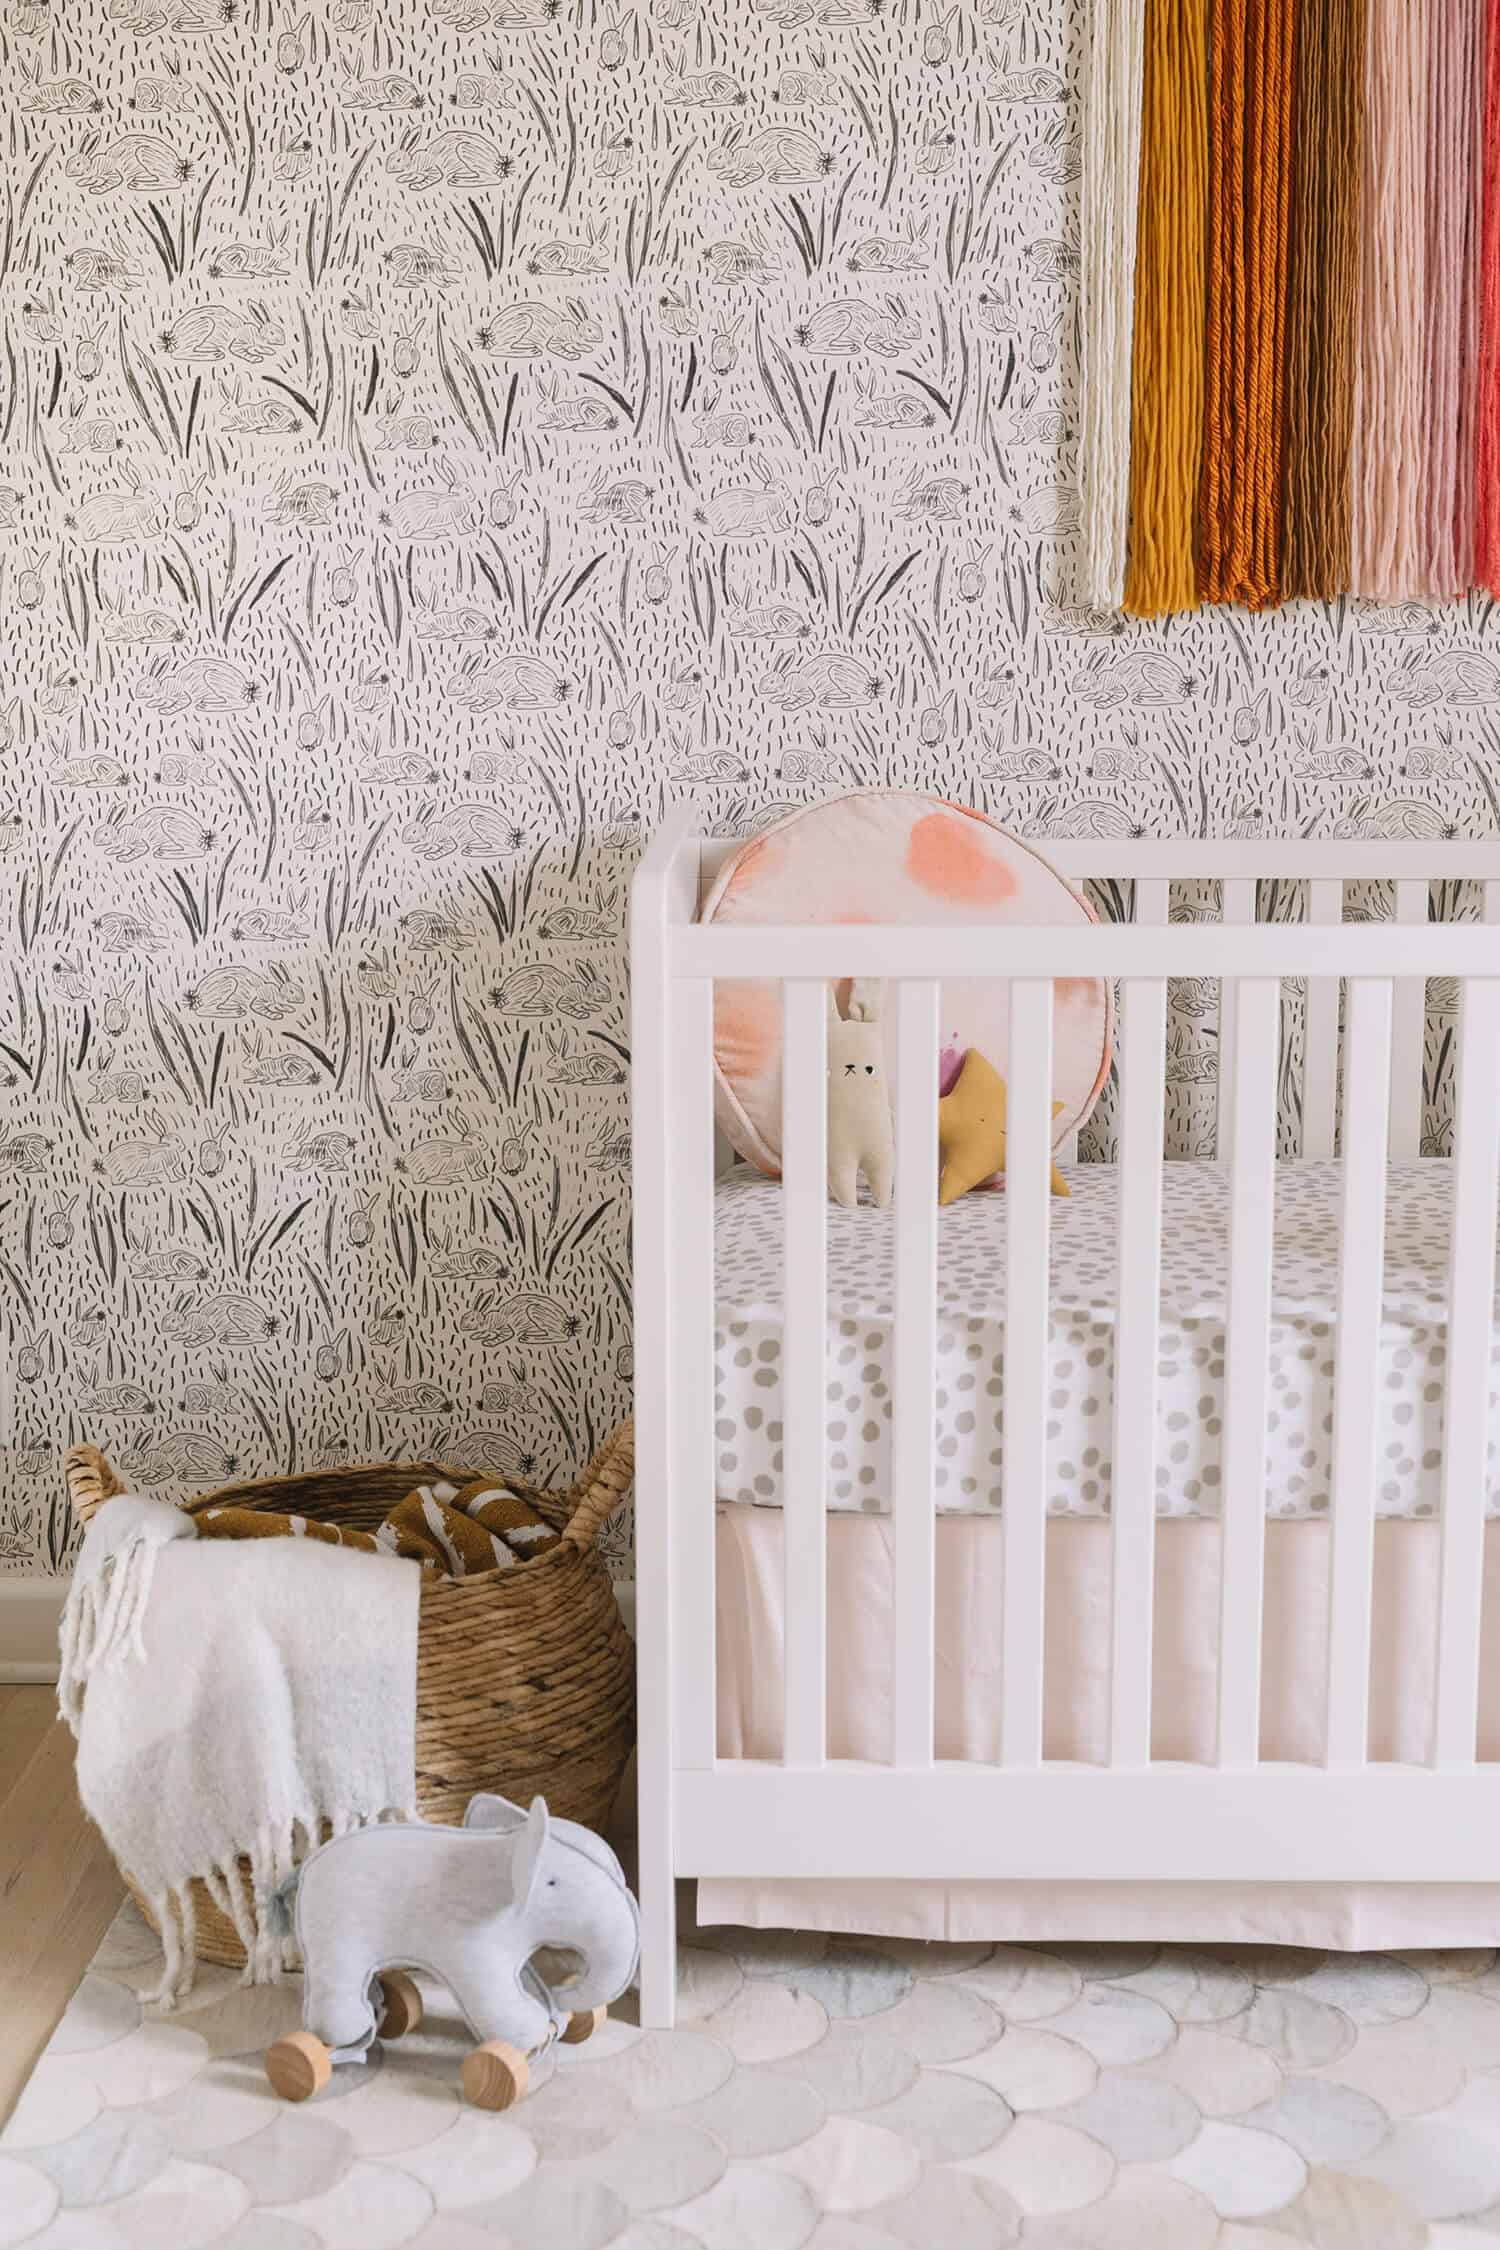 Elsie S Nursery Tour And Baby Name A Beautiful Mess